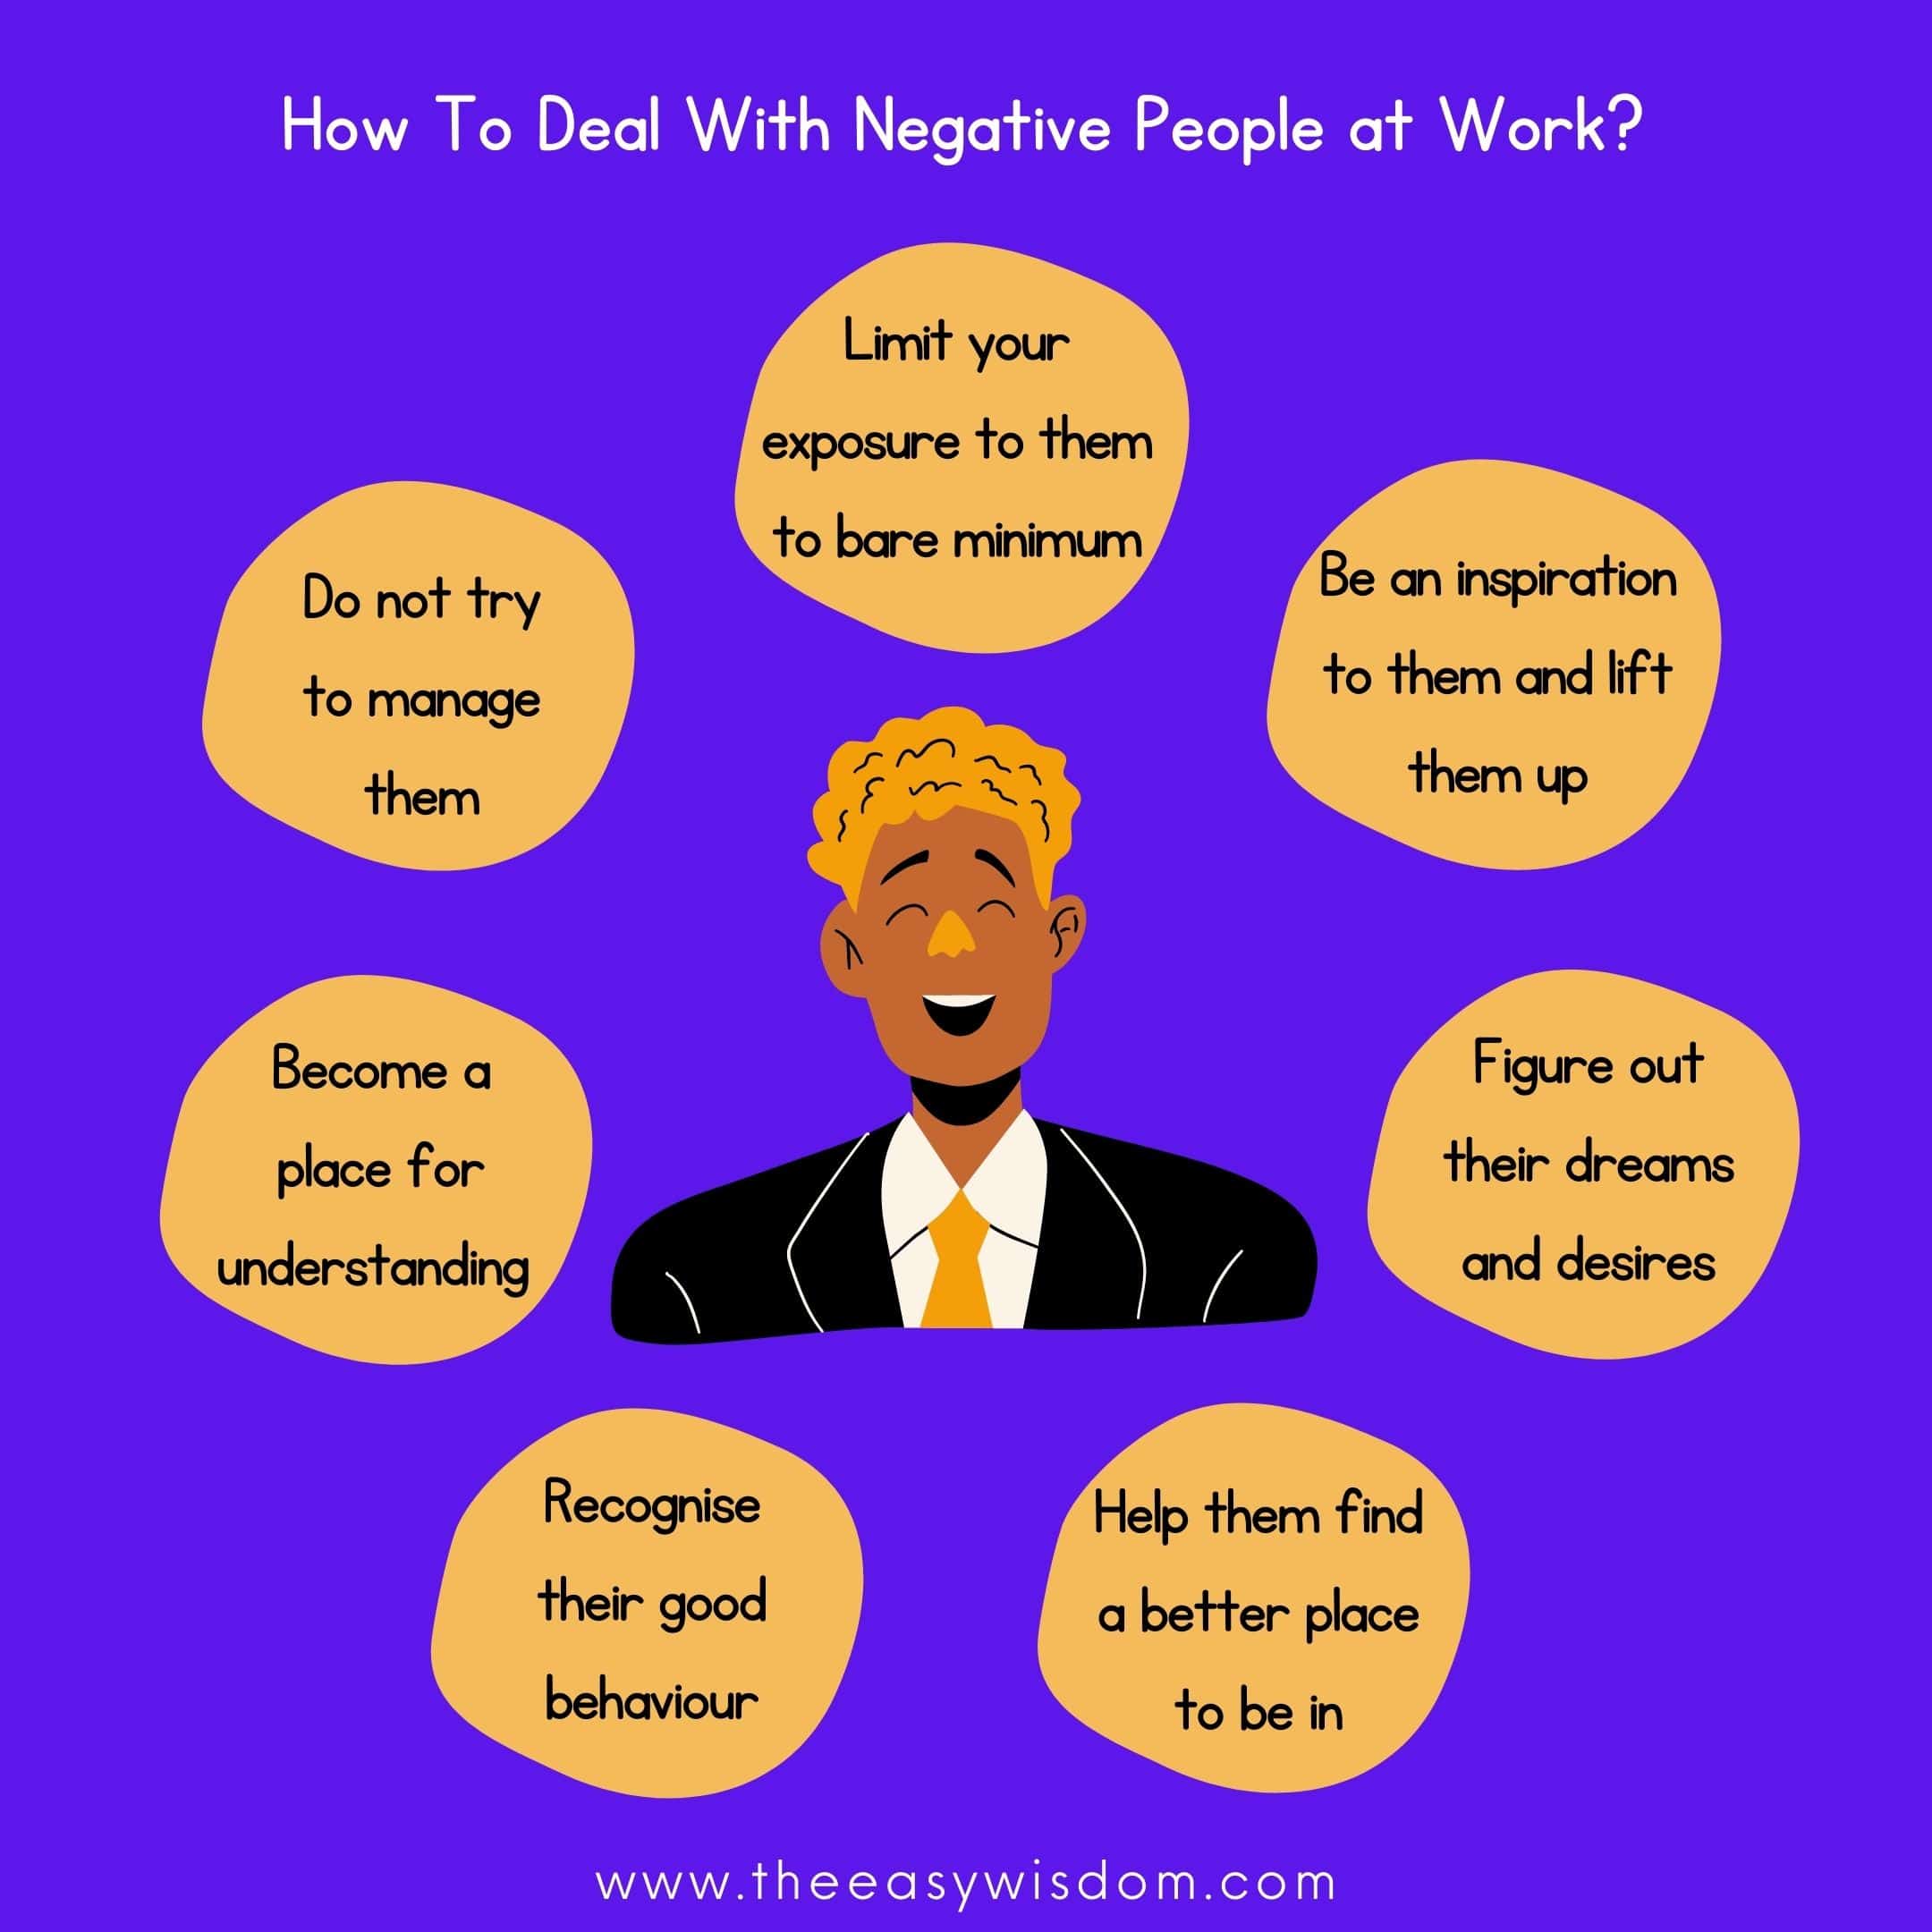 how to deal with negative people at work infographic-www.theeasywisdom.com